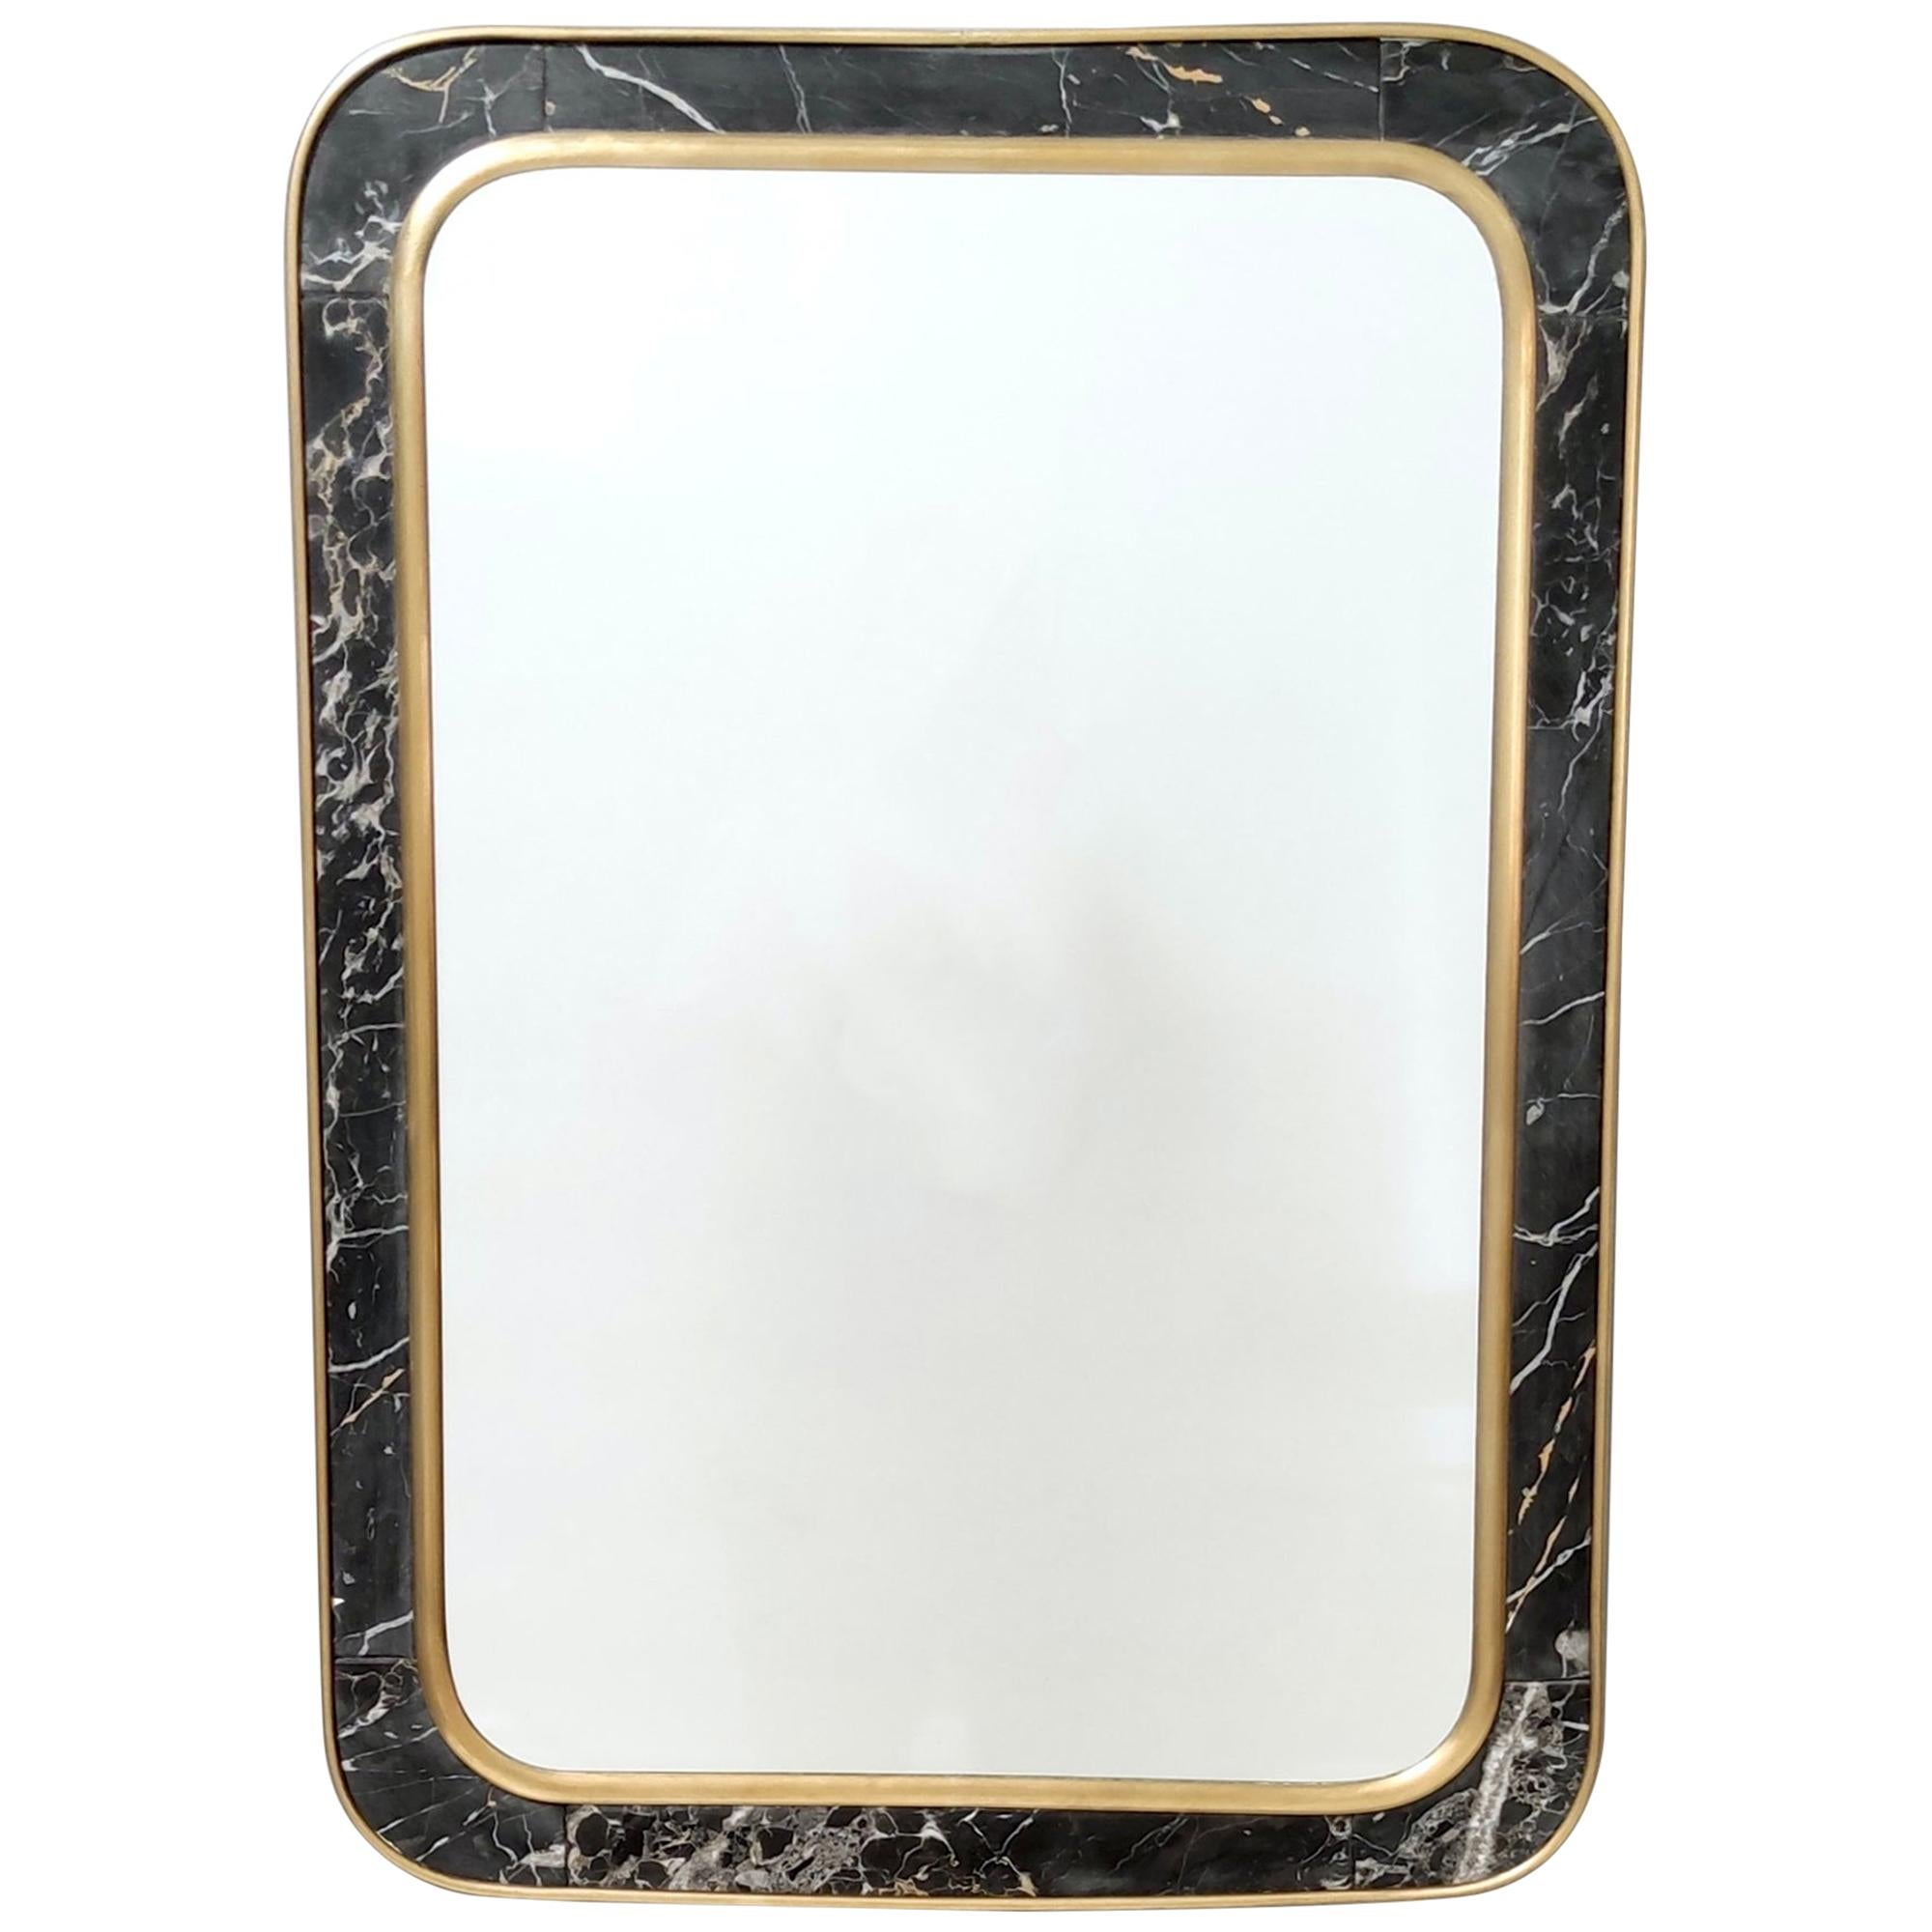 Midcentury Rectangular Wall Mirror with Brass and Black Portoro Marble Frame